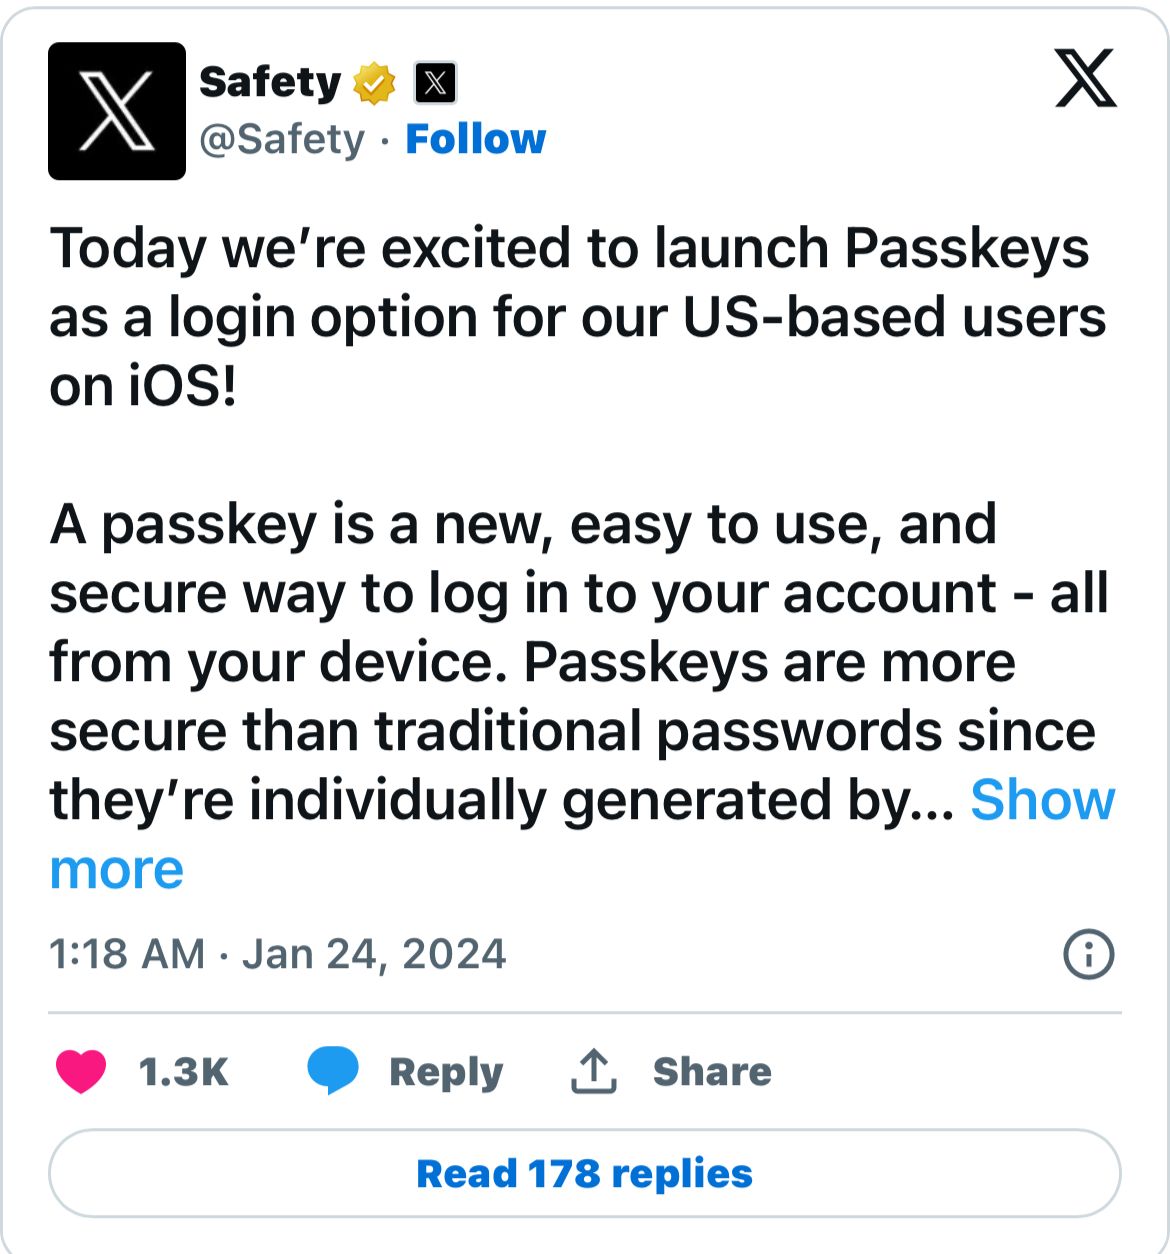 X introduces passkey authentication for iOS users in the U.S